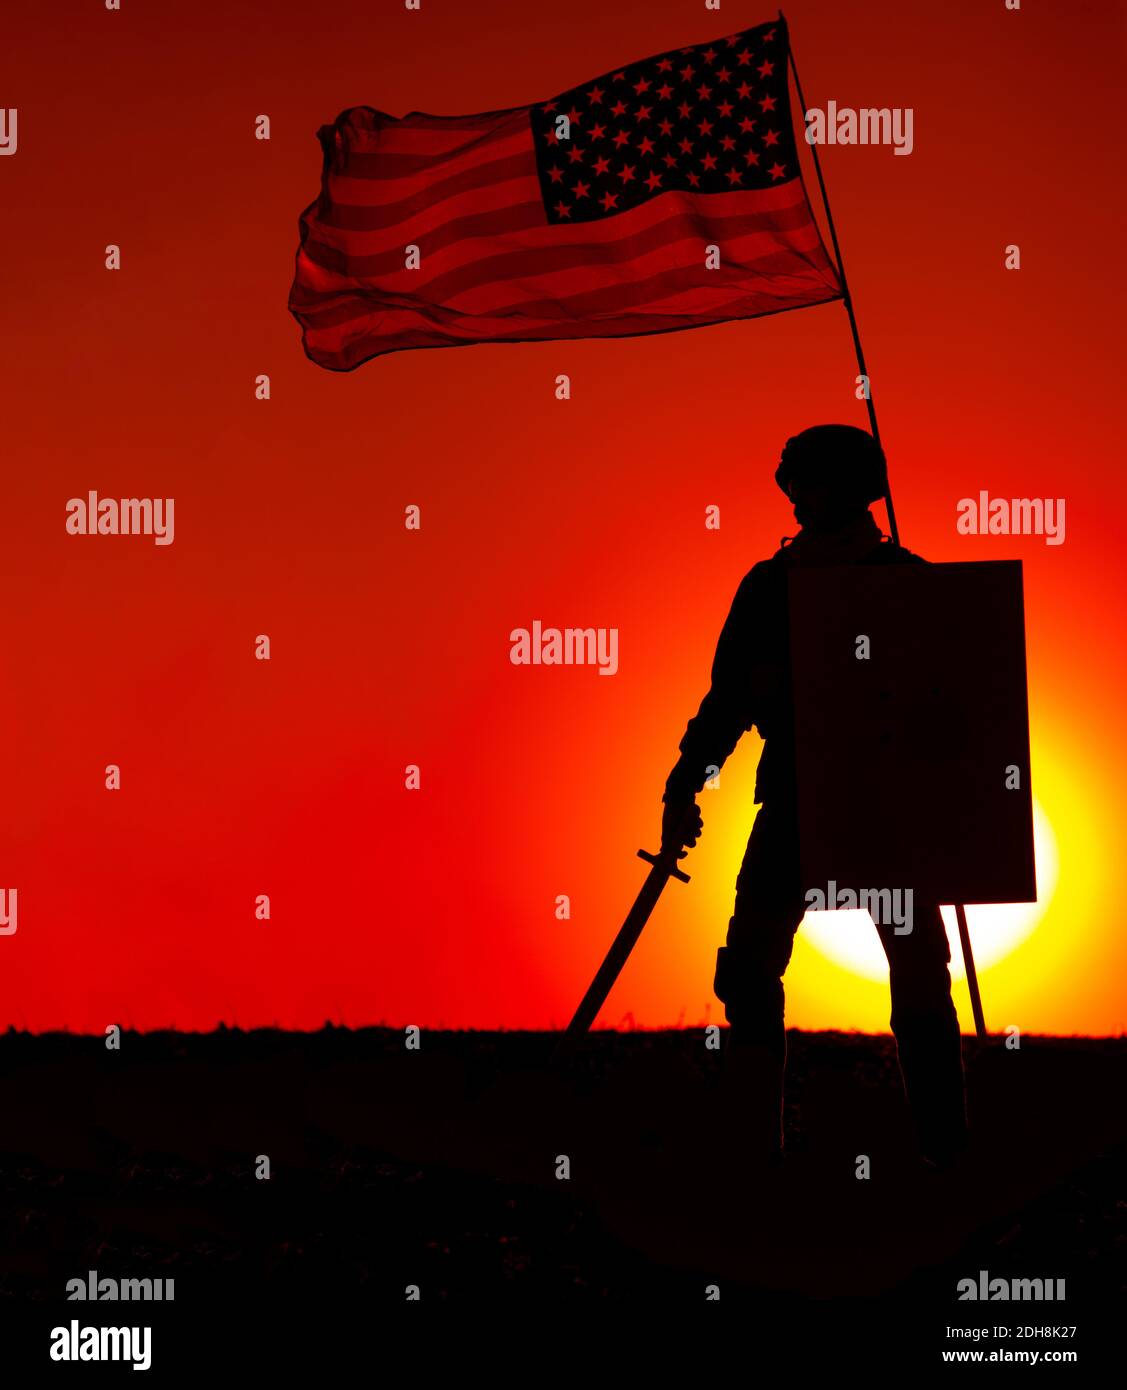 Silhouette of American army soldier armed sword and shield standing under waving US national flag on background of sunset. Army hero and patriot, military glory and honor, fallen soldiers remembrance Stock Photo